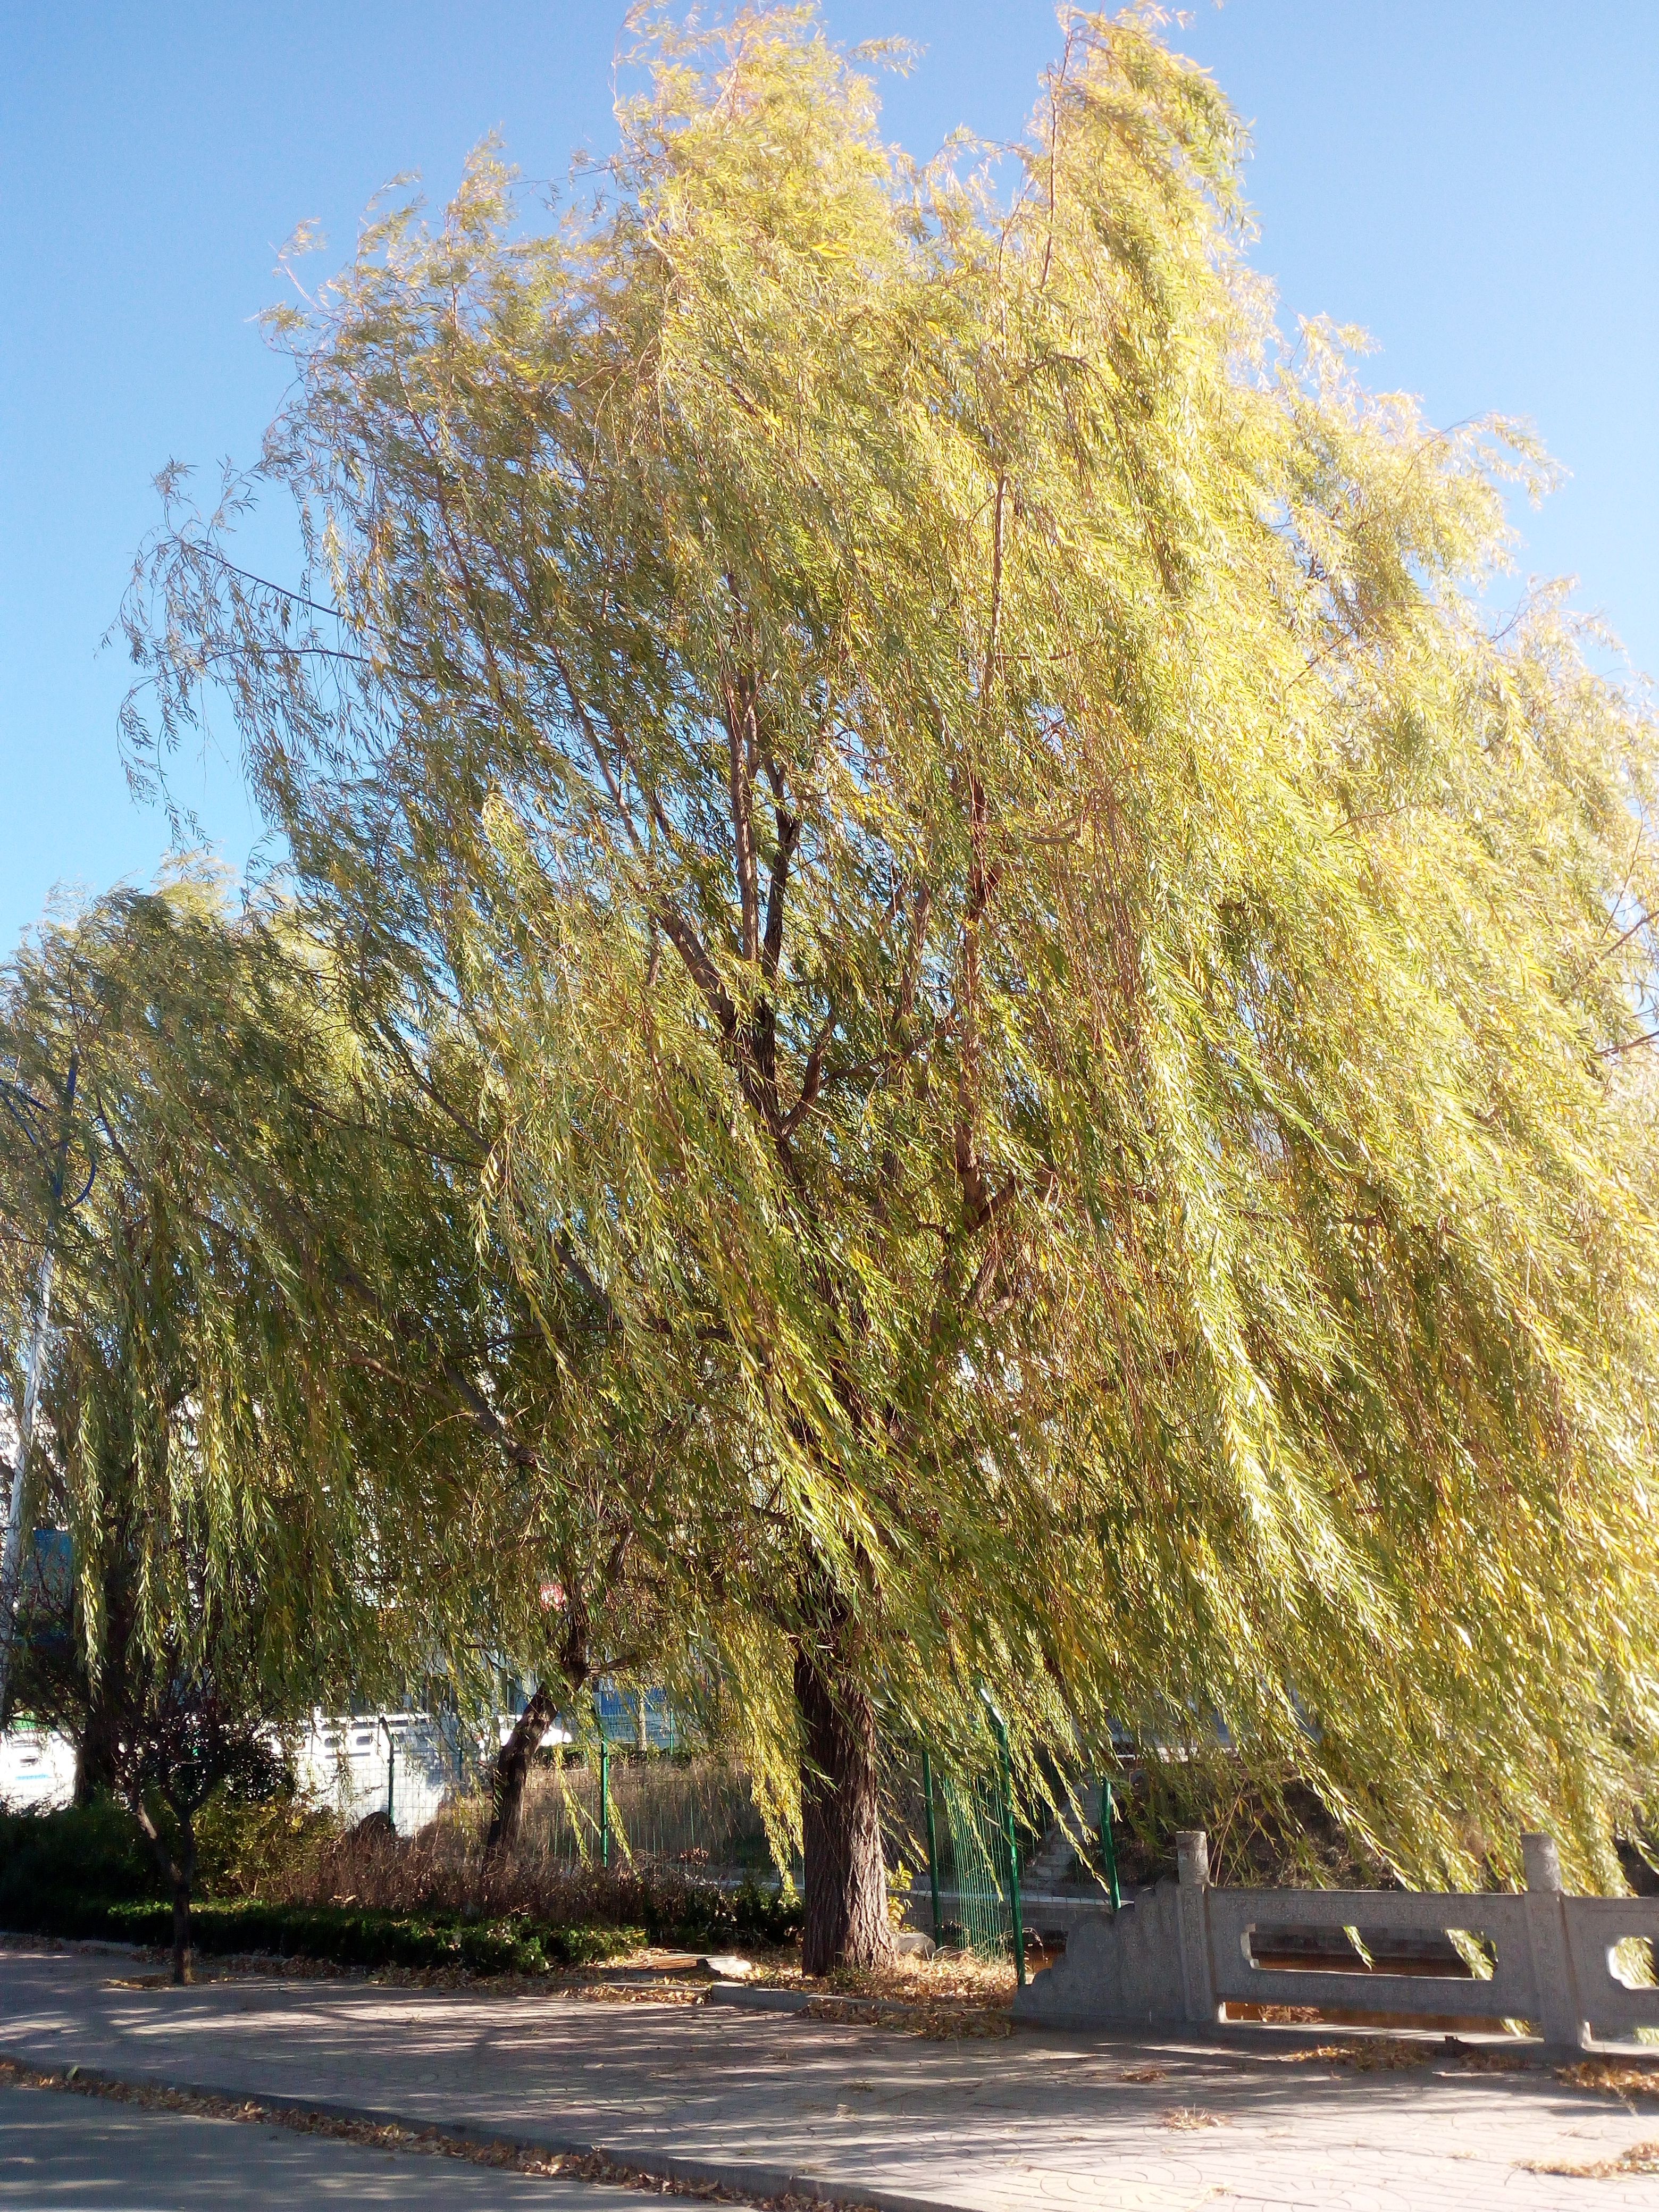 The Willow Trees Are Like Smoke